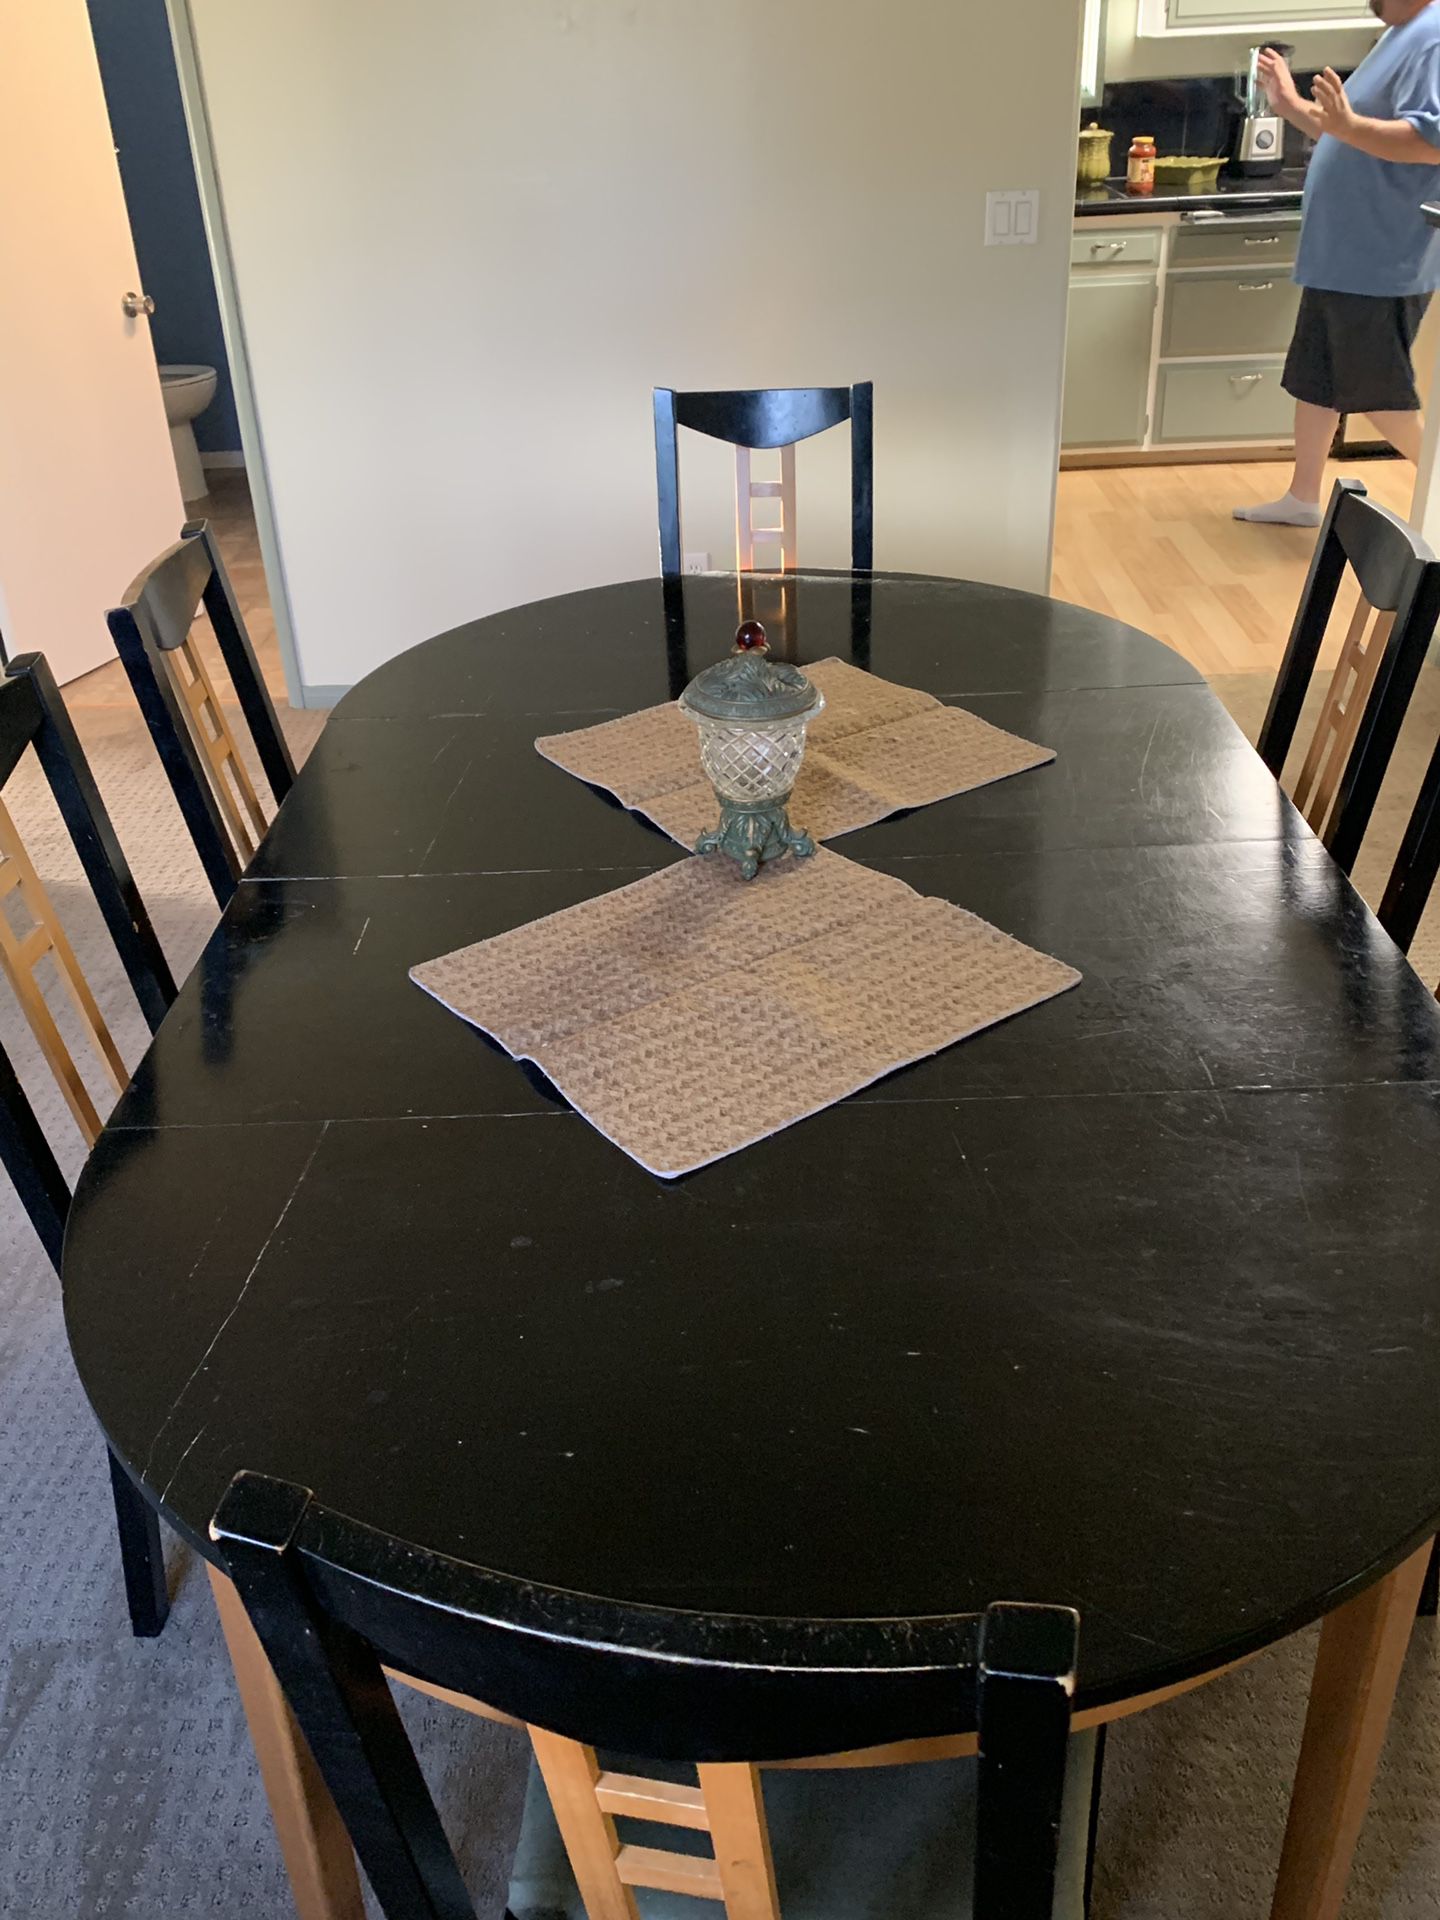 Used dining room table, chairs and accent table